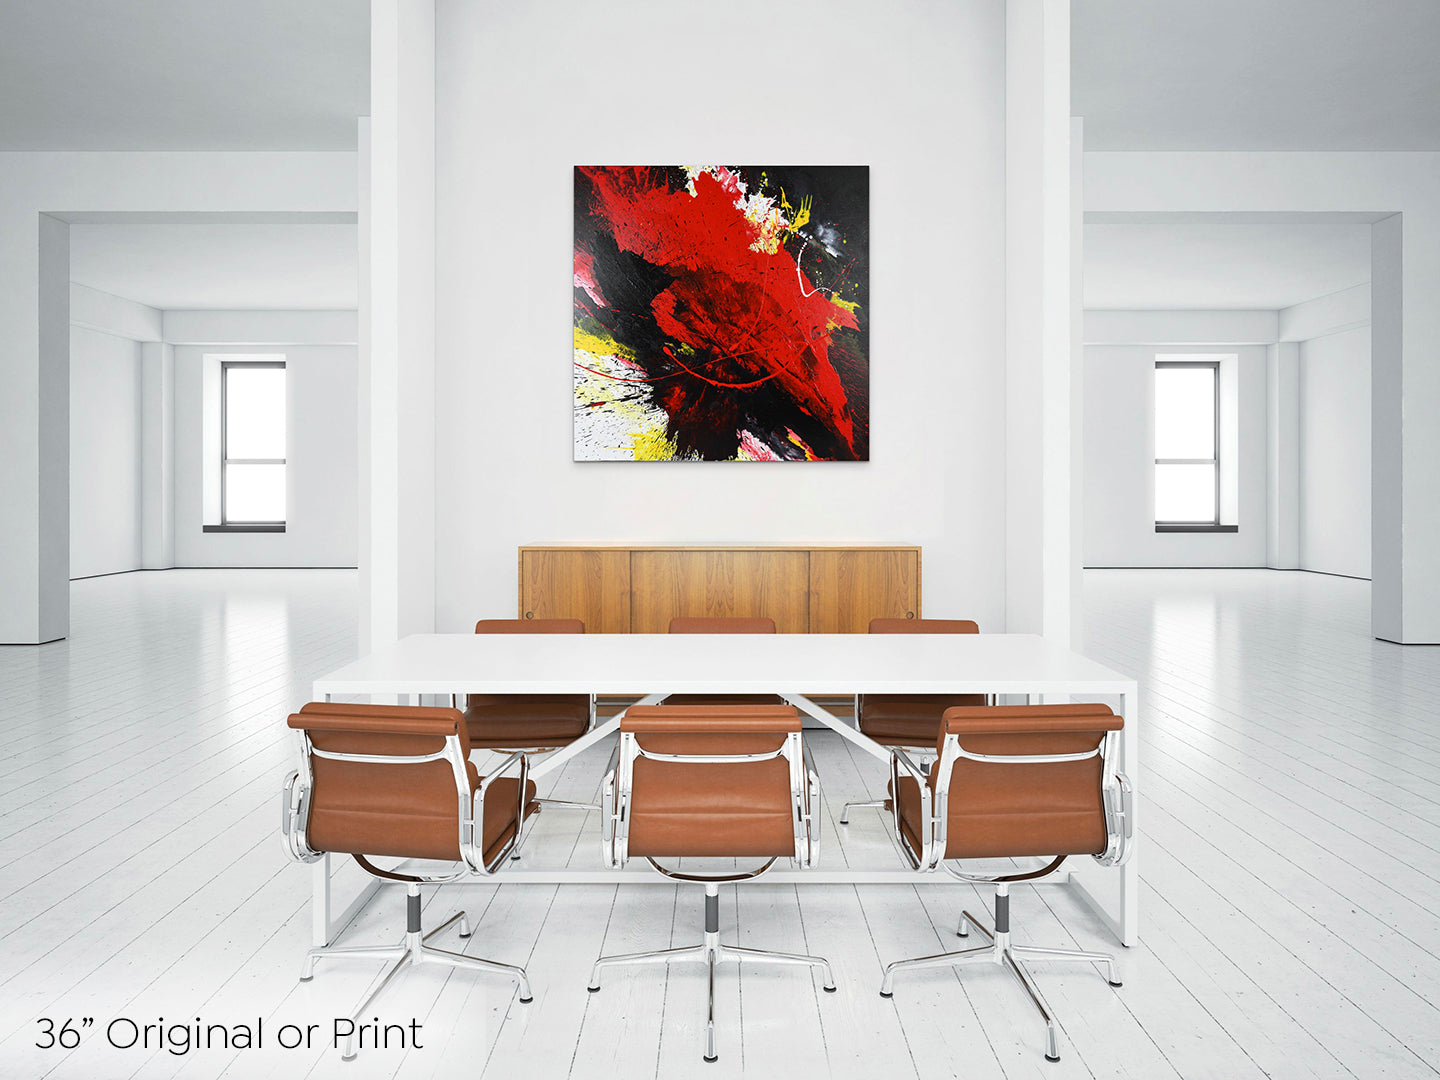 Abstract, expressionism, acrylic 36” original painting or giclee print: tumultuous explosion of bright red, black, yellow and white on a white wall in a stylish office boardroom.